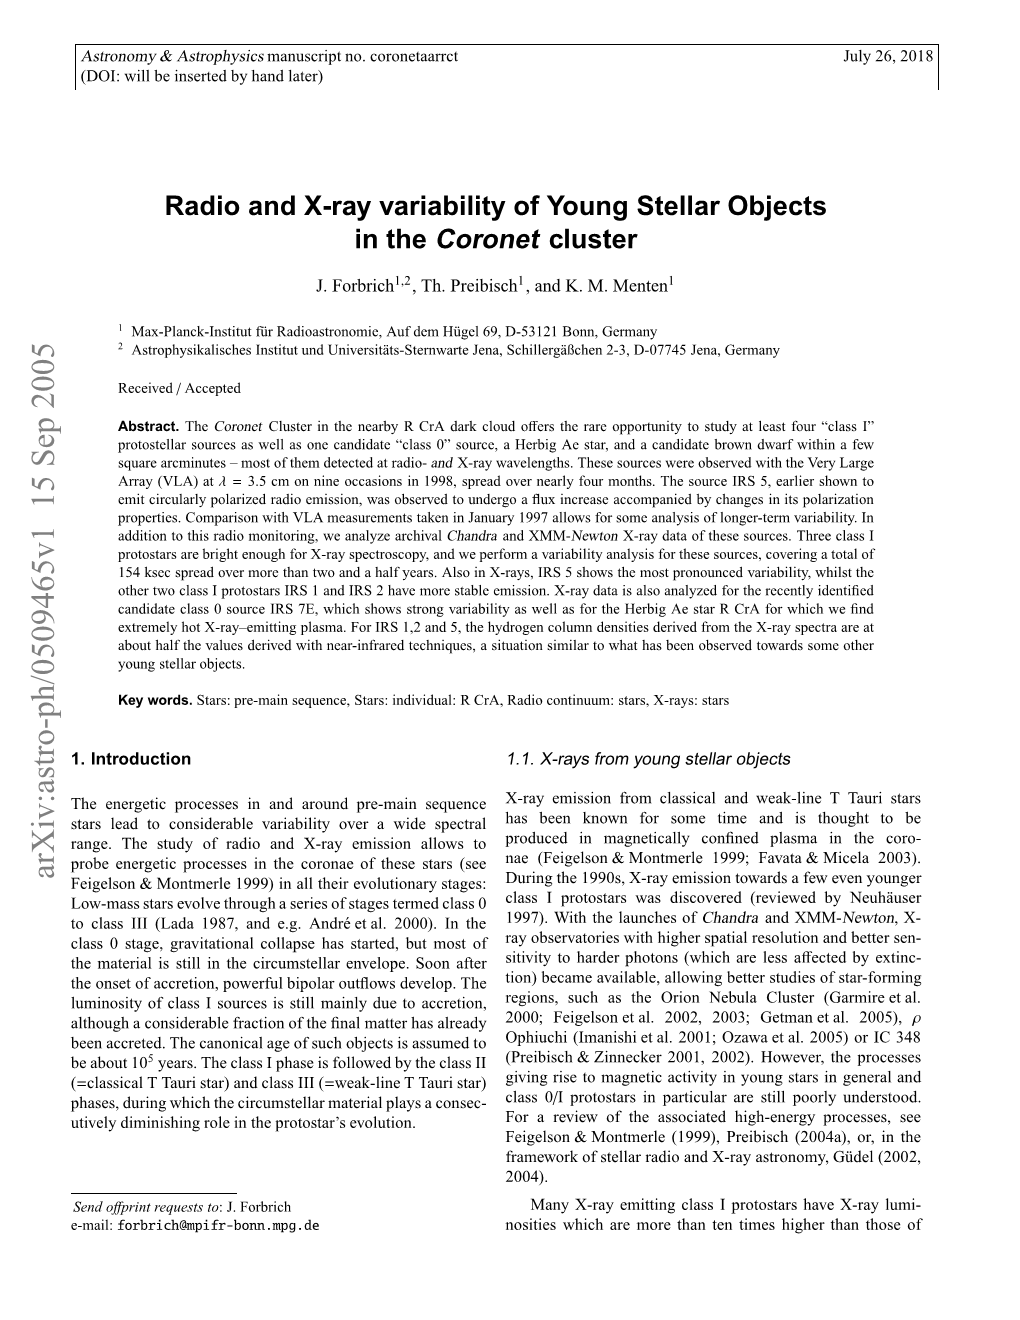 Radio and X-Ray Variability of Young Stellar Objects in the Coronet Cluster